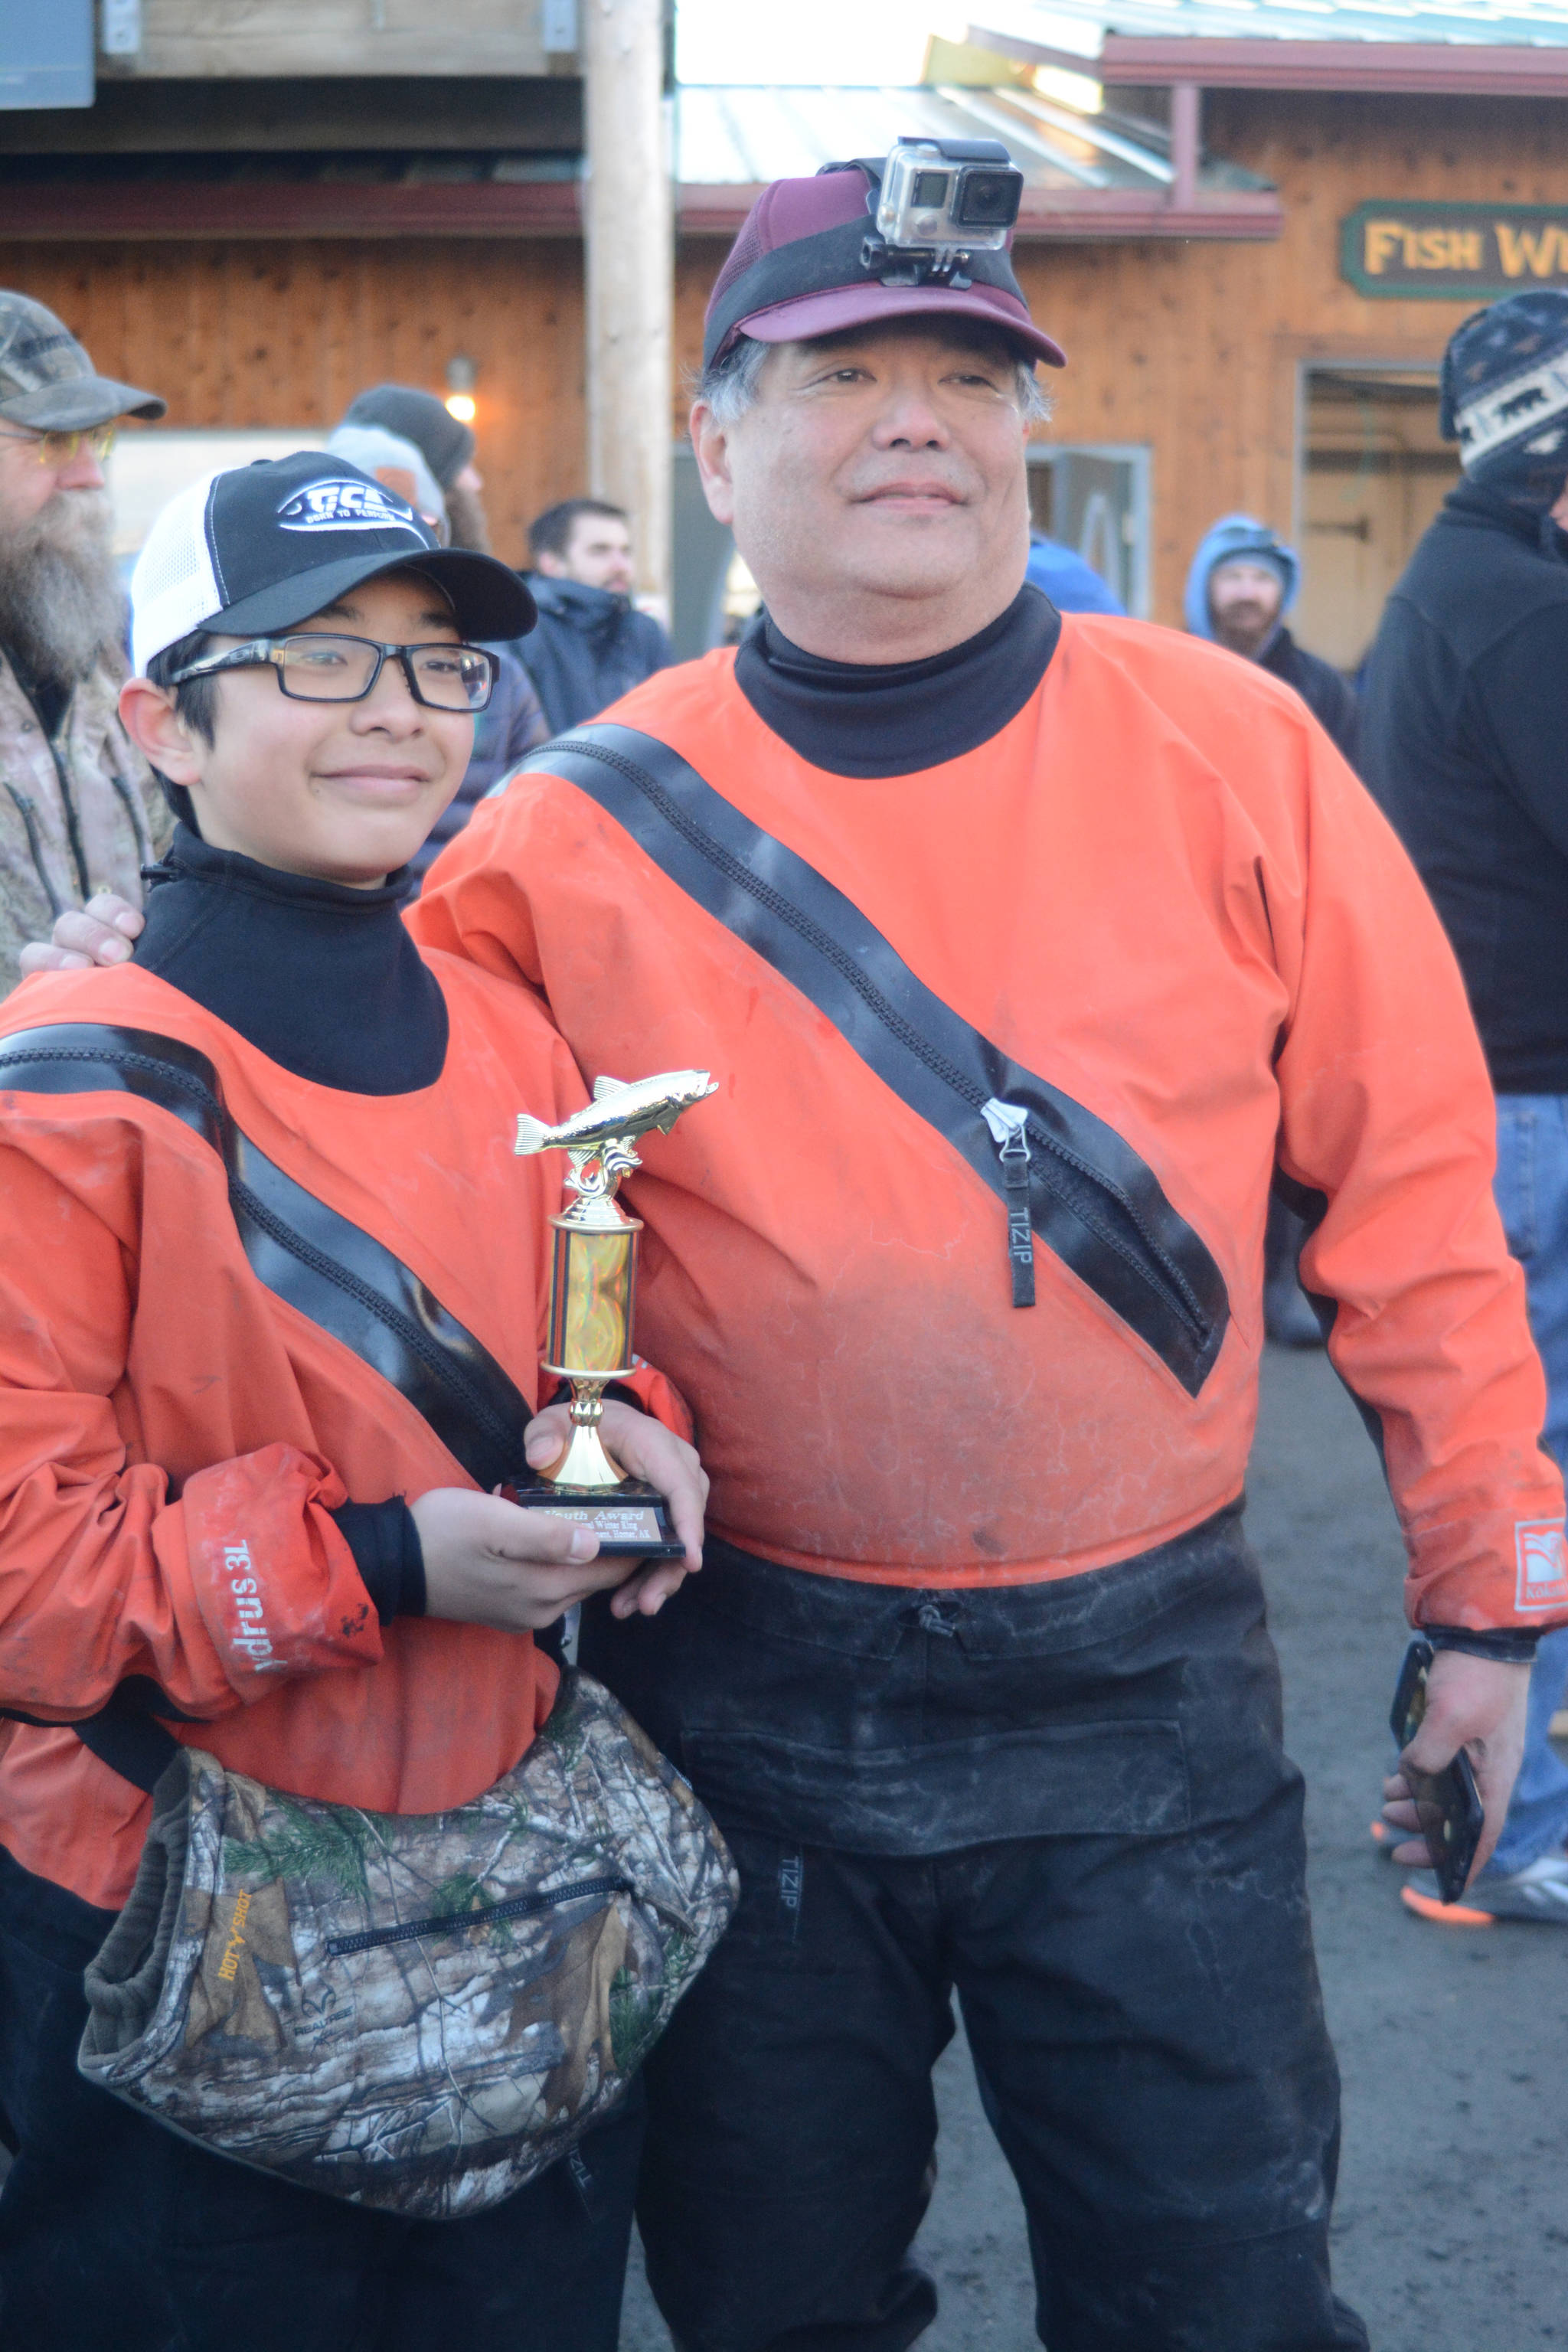 Johnson wins Winter King with 25.65-pound beauty